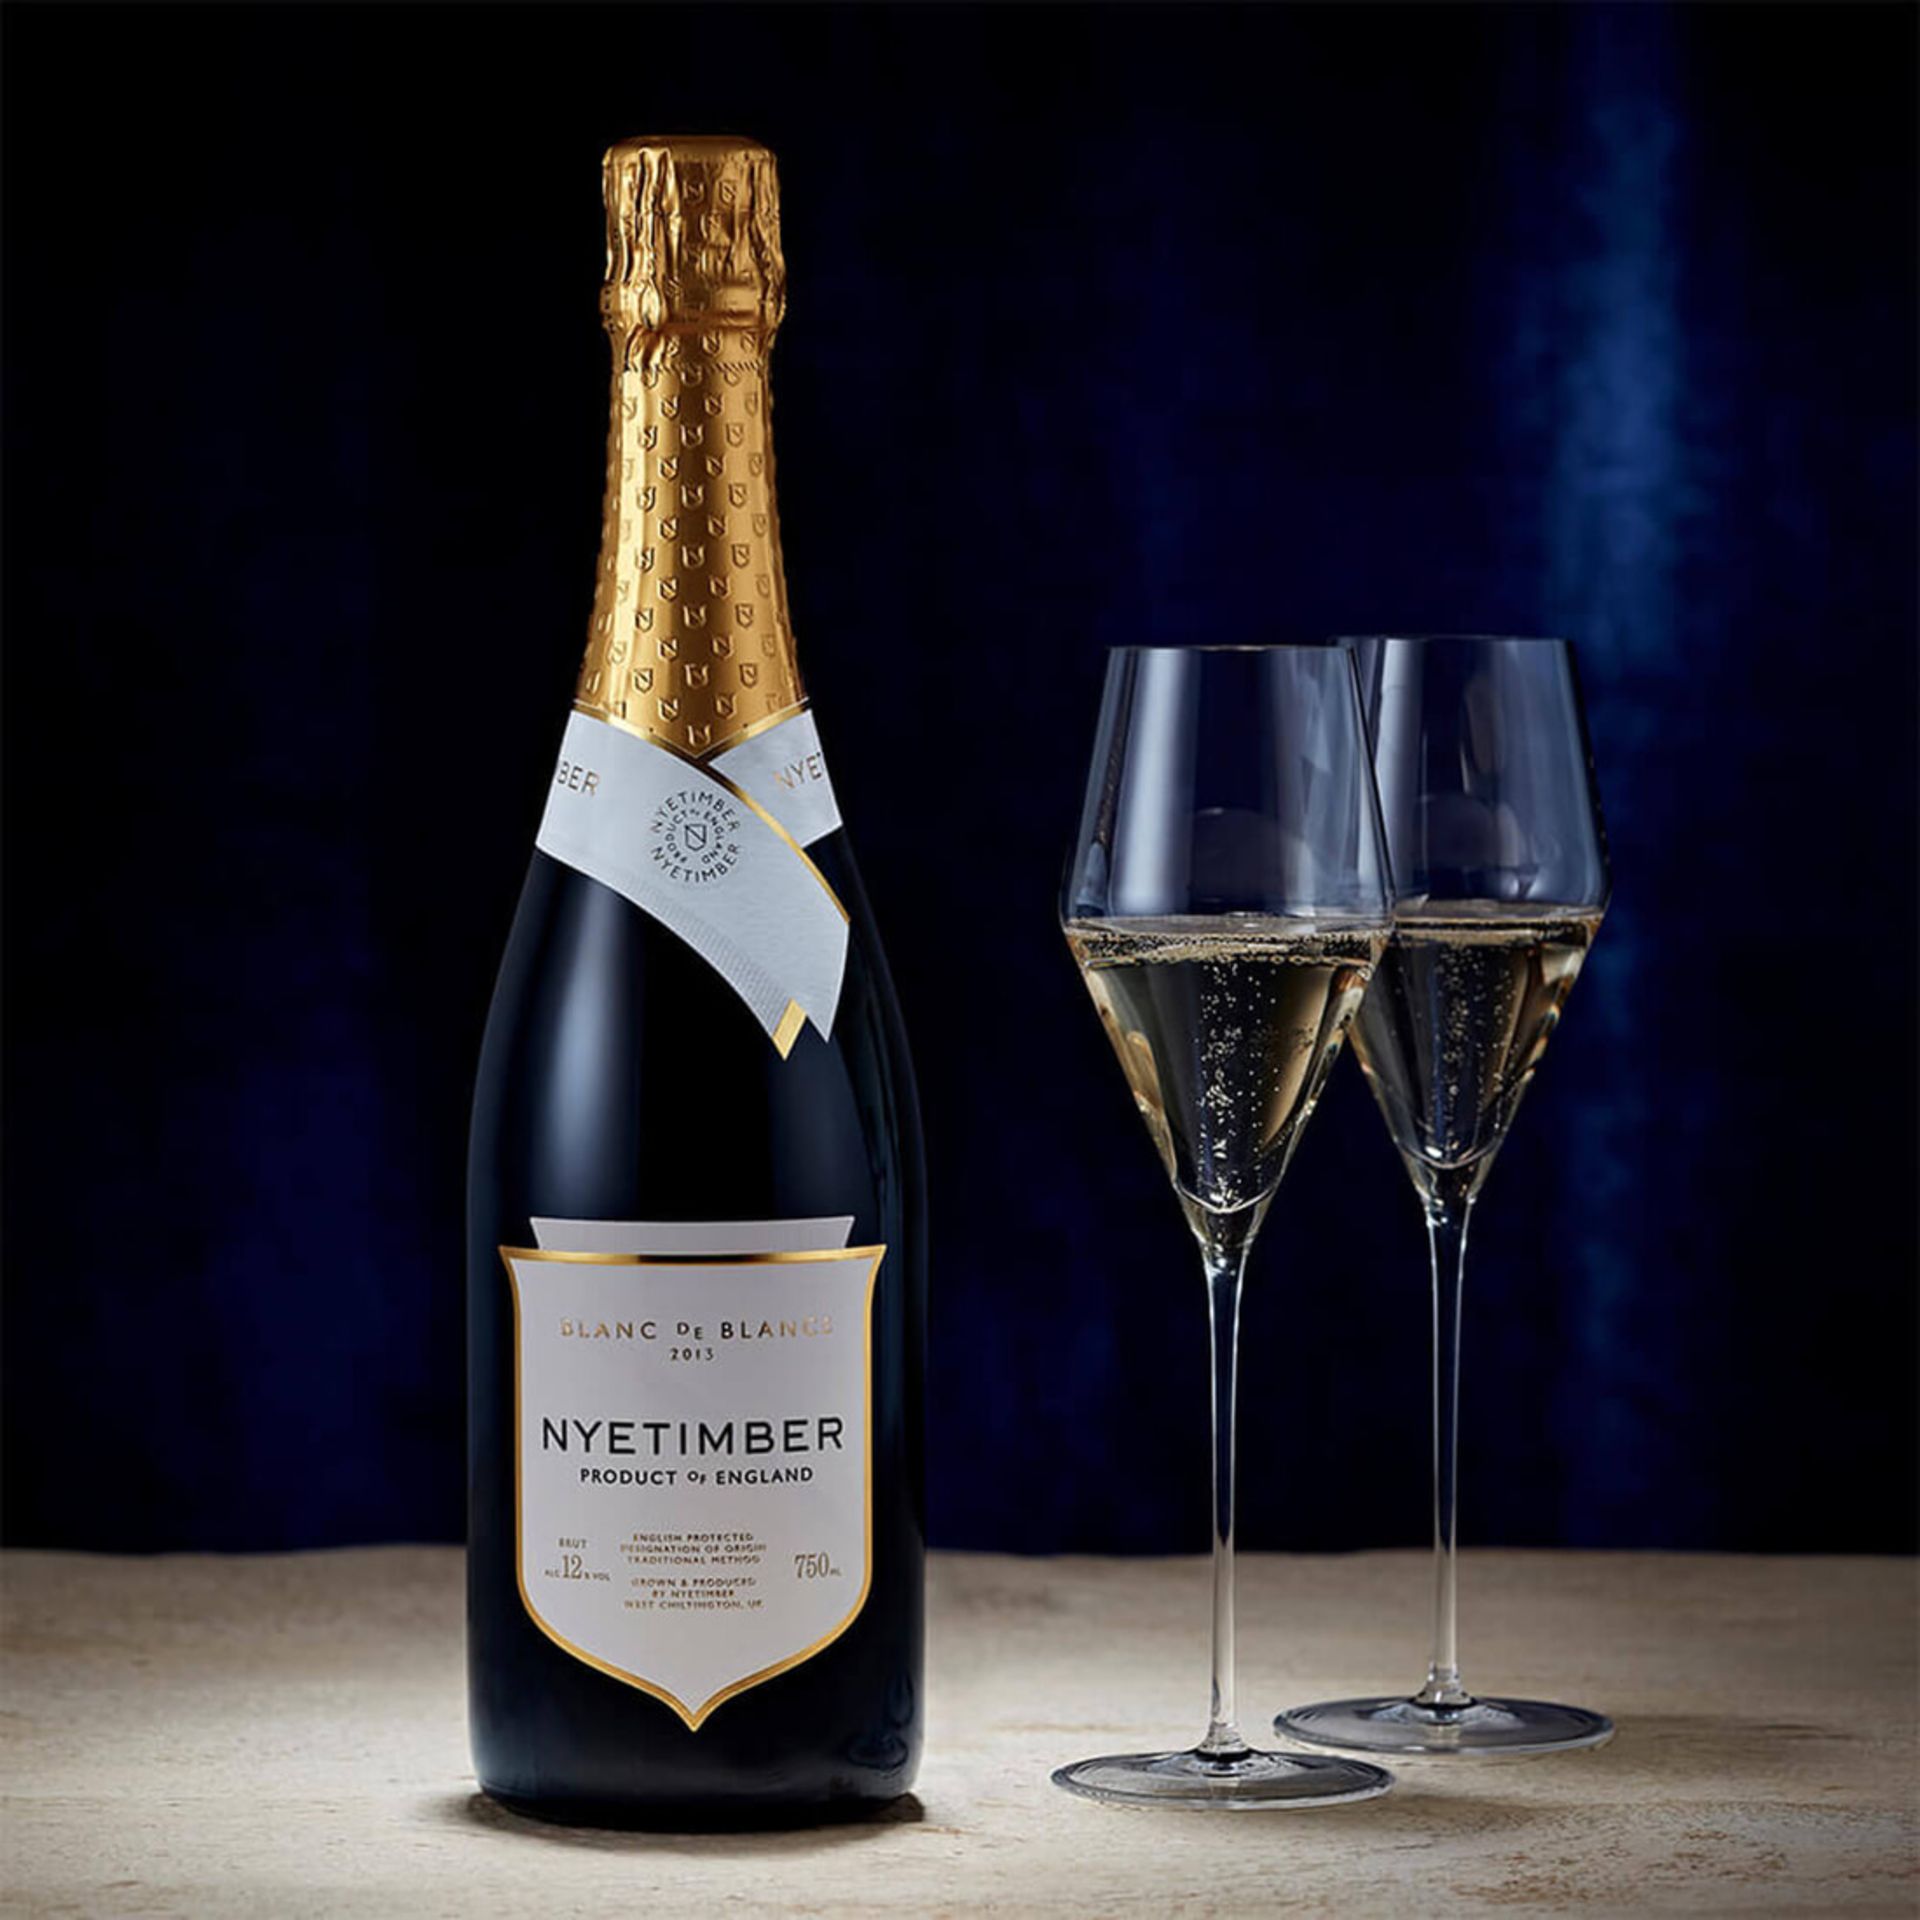 Nyetimber Blanc De Blancs 2013 Vintage 750ml ( Bid Is For 1x Bottle Option To Purchase More)